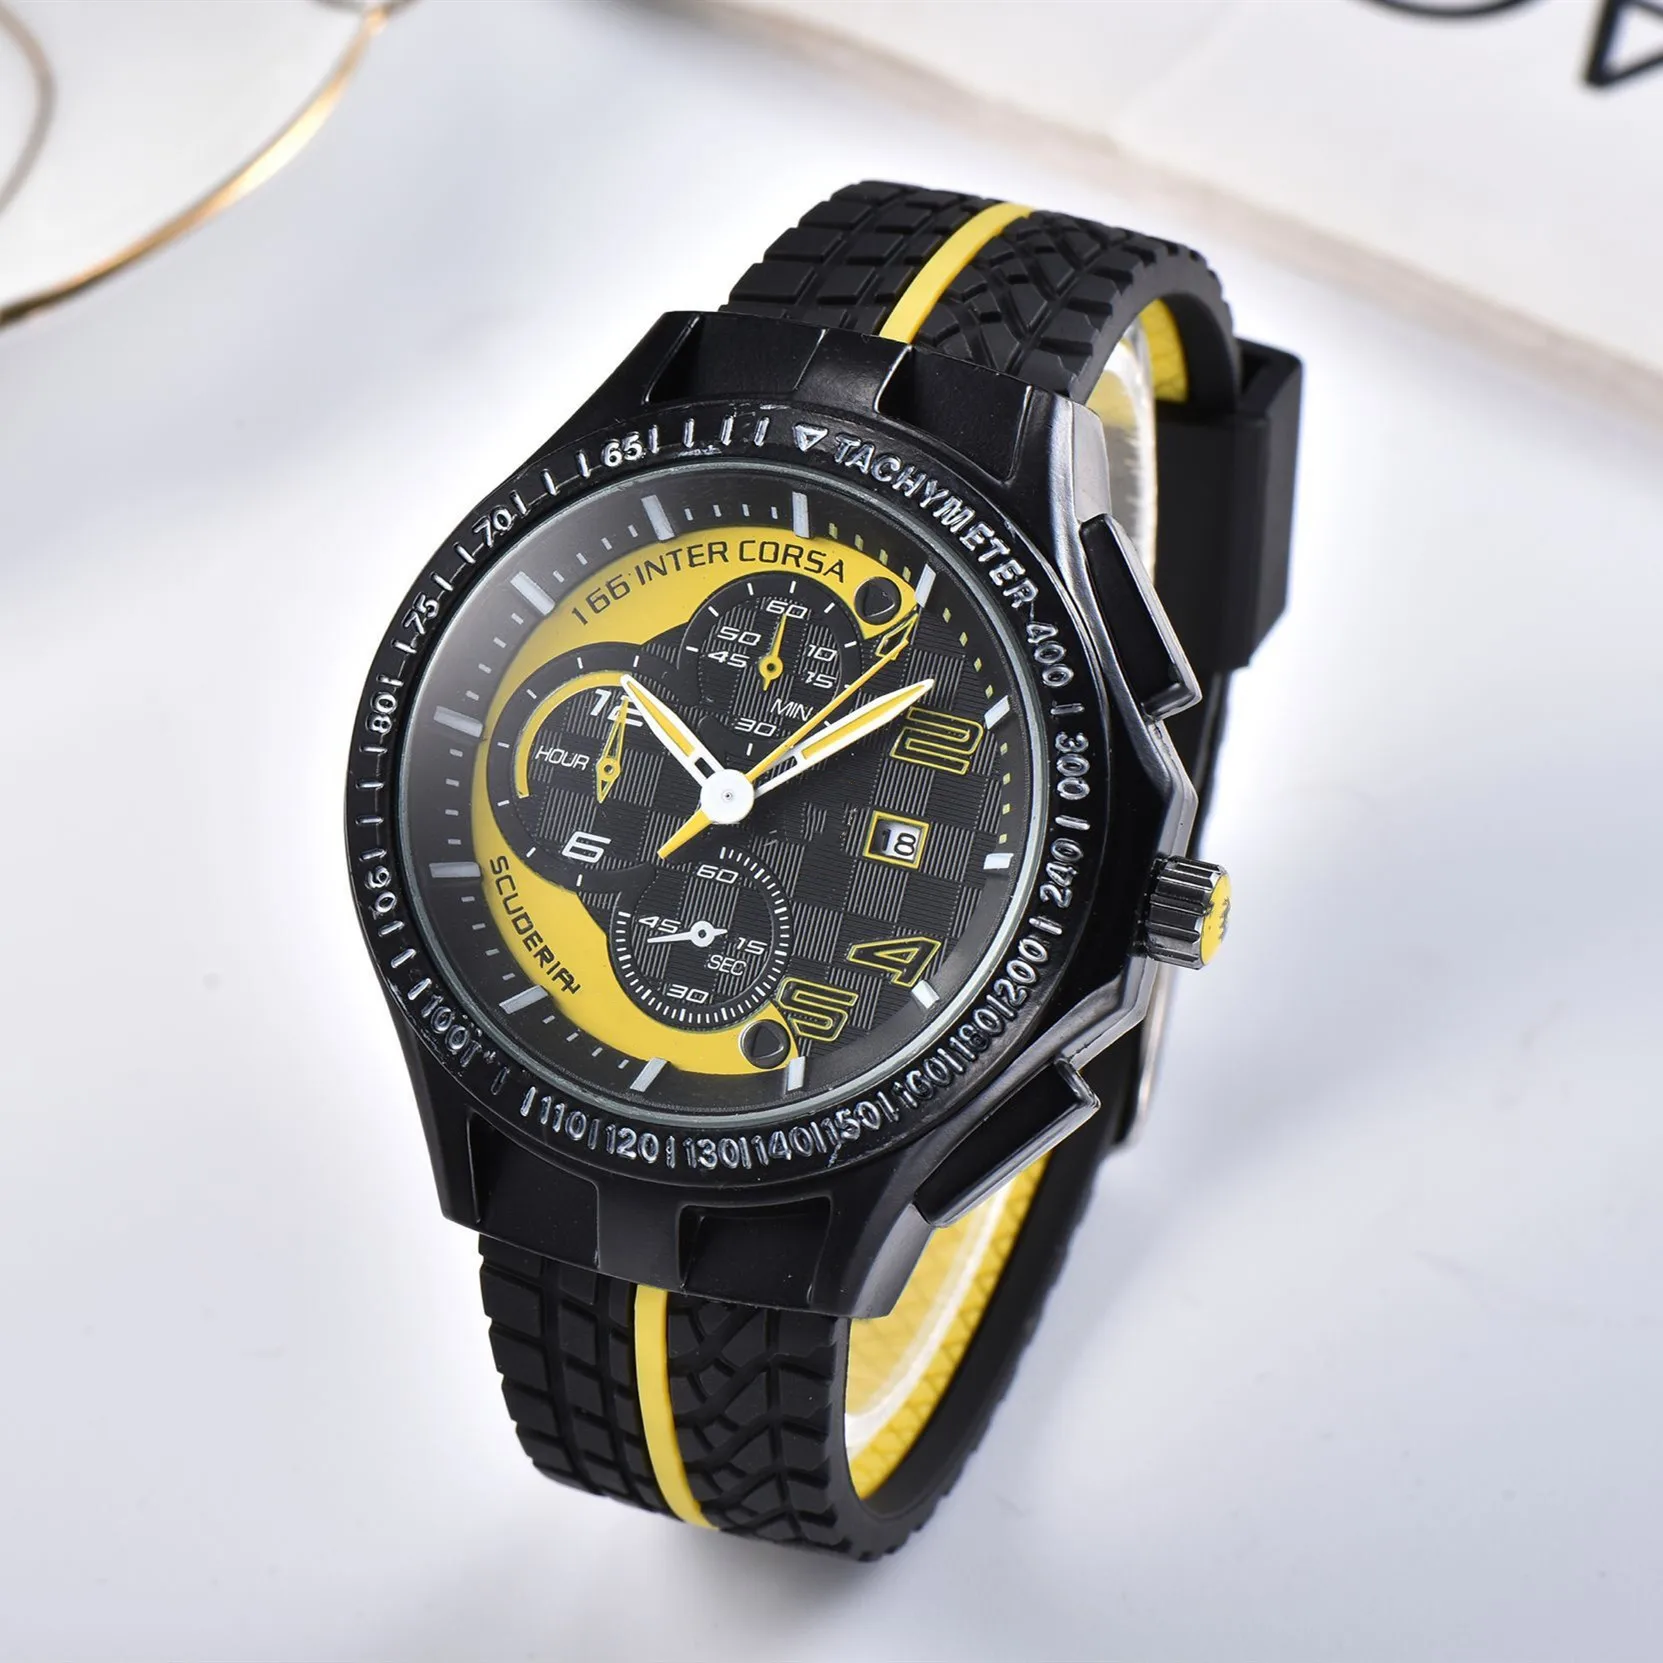 Luxury Sports Racing car F1 Formula Rubber Watch Strap Stainless steel Quartz Watches for Men Watch Casual Wrist Watch Clock